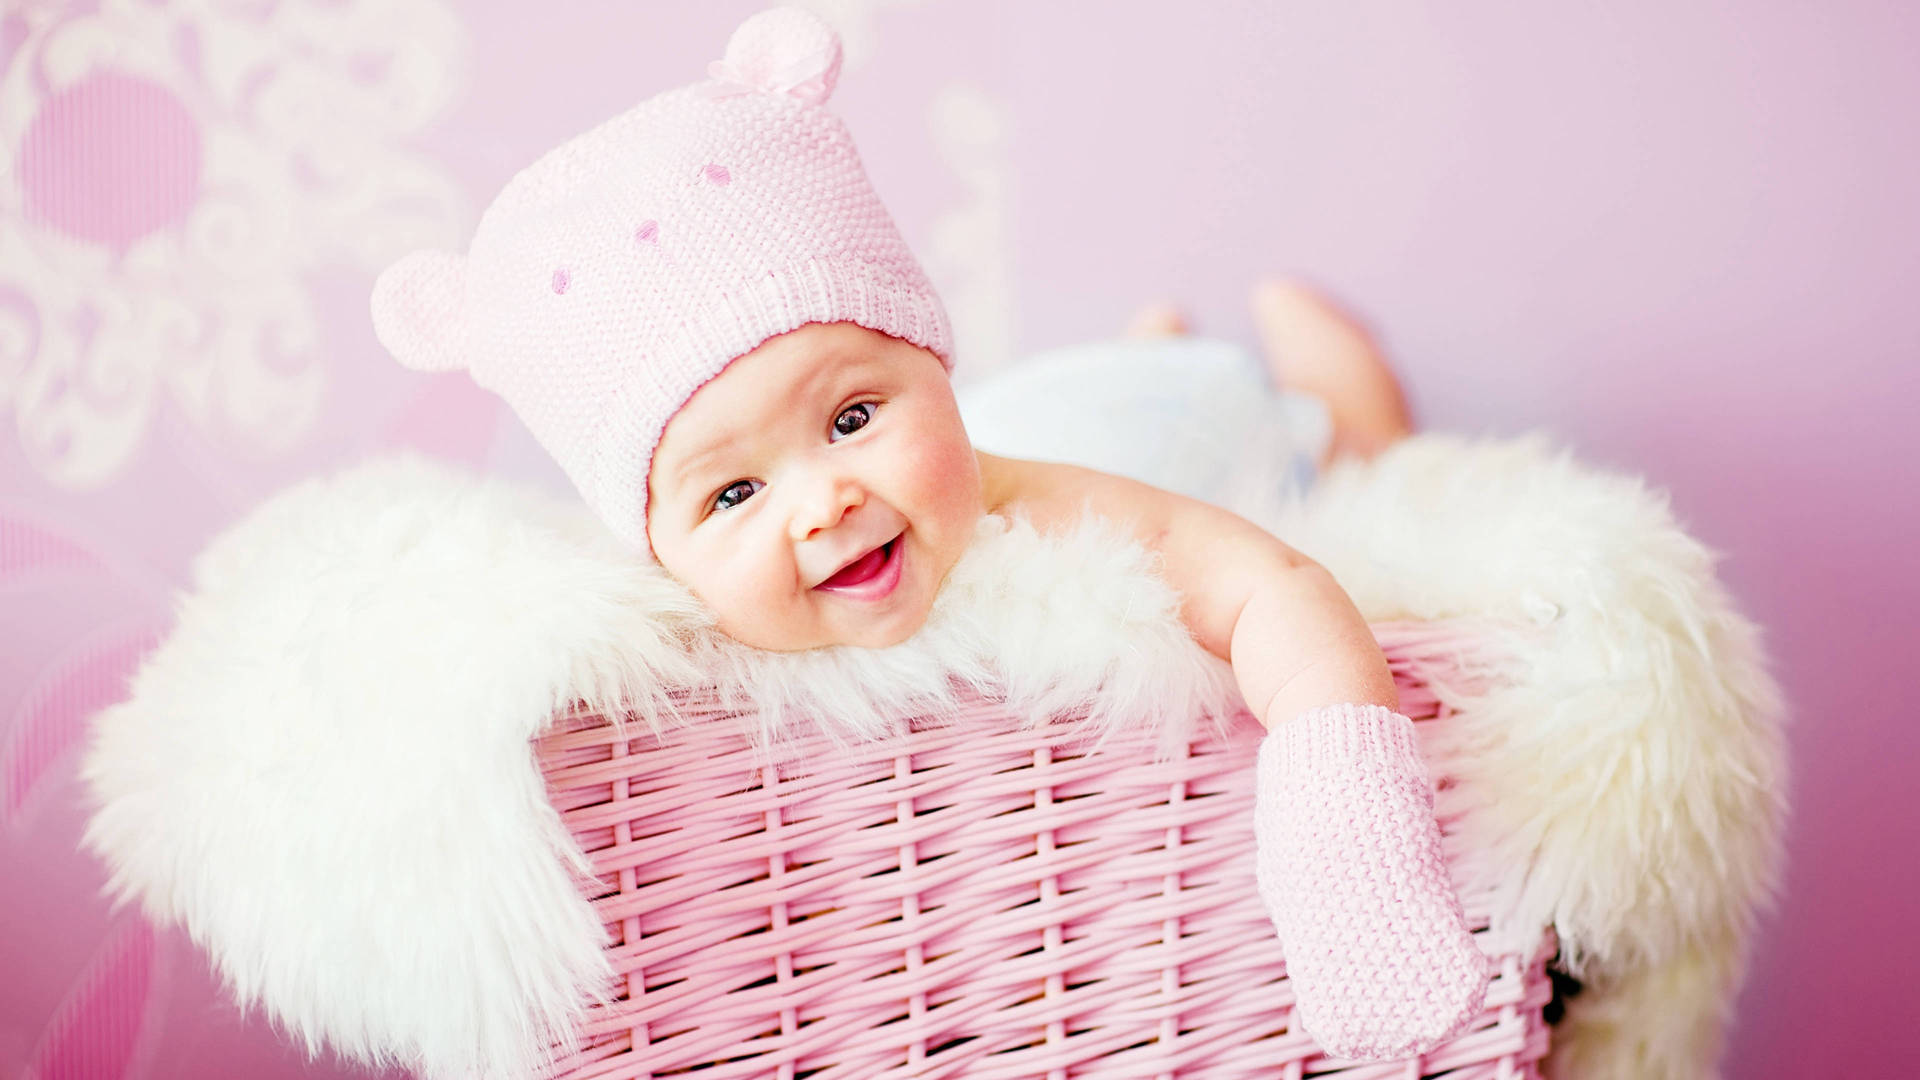 Download Bright Smile Cute Baby Girl Wallpaper 